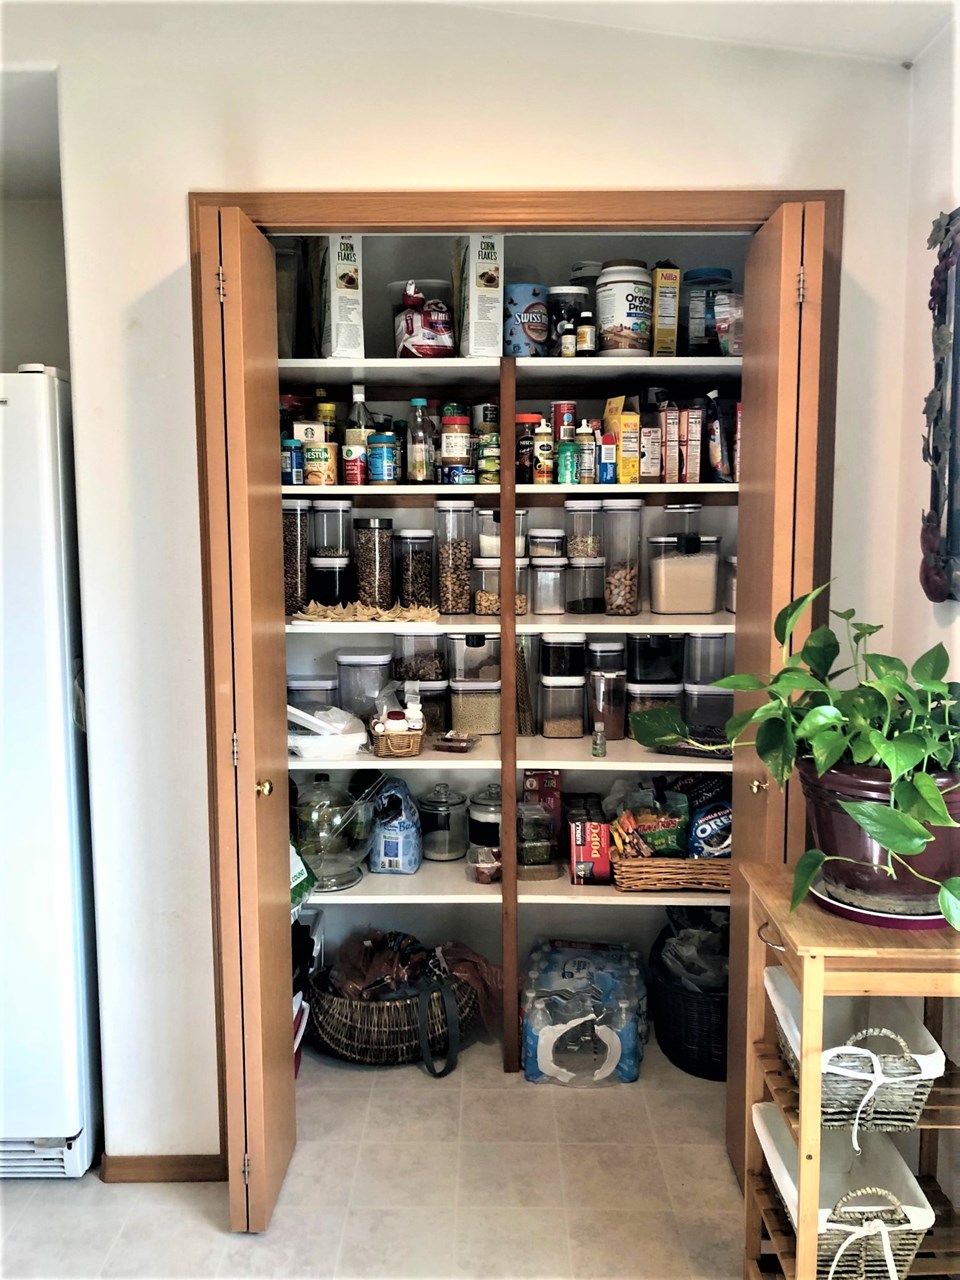 nice pantry with lots of shelving